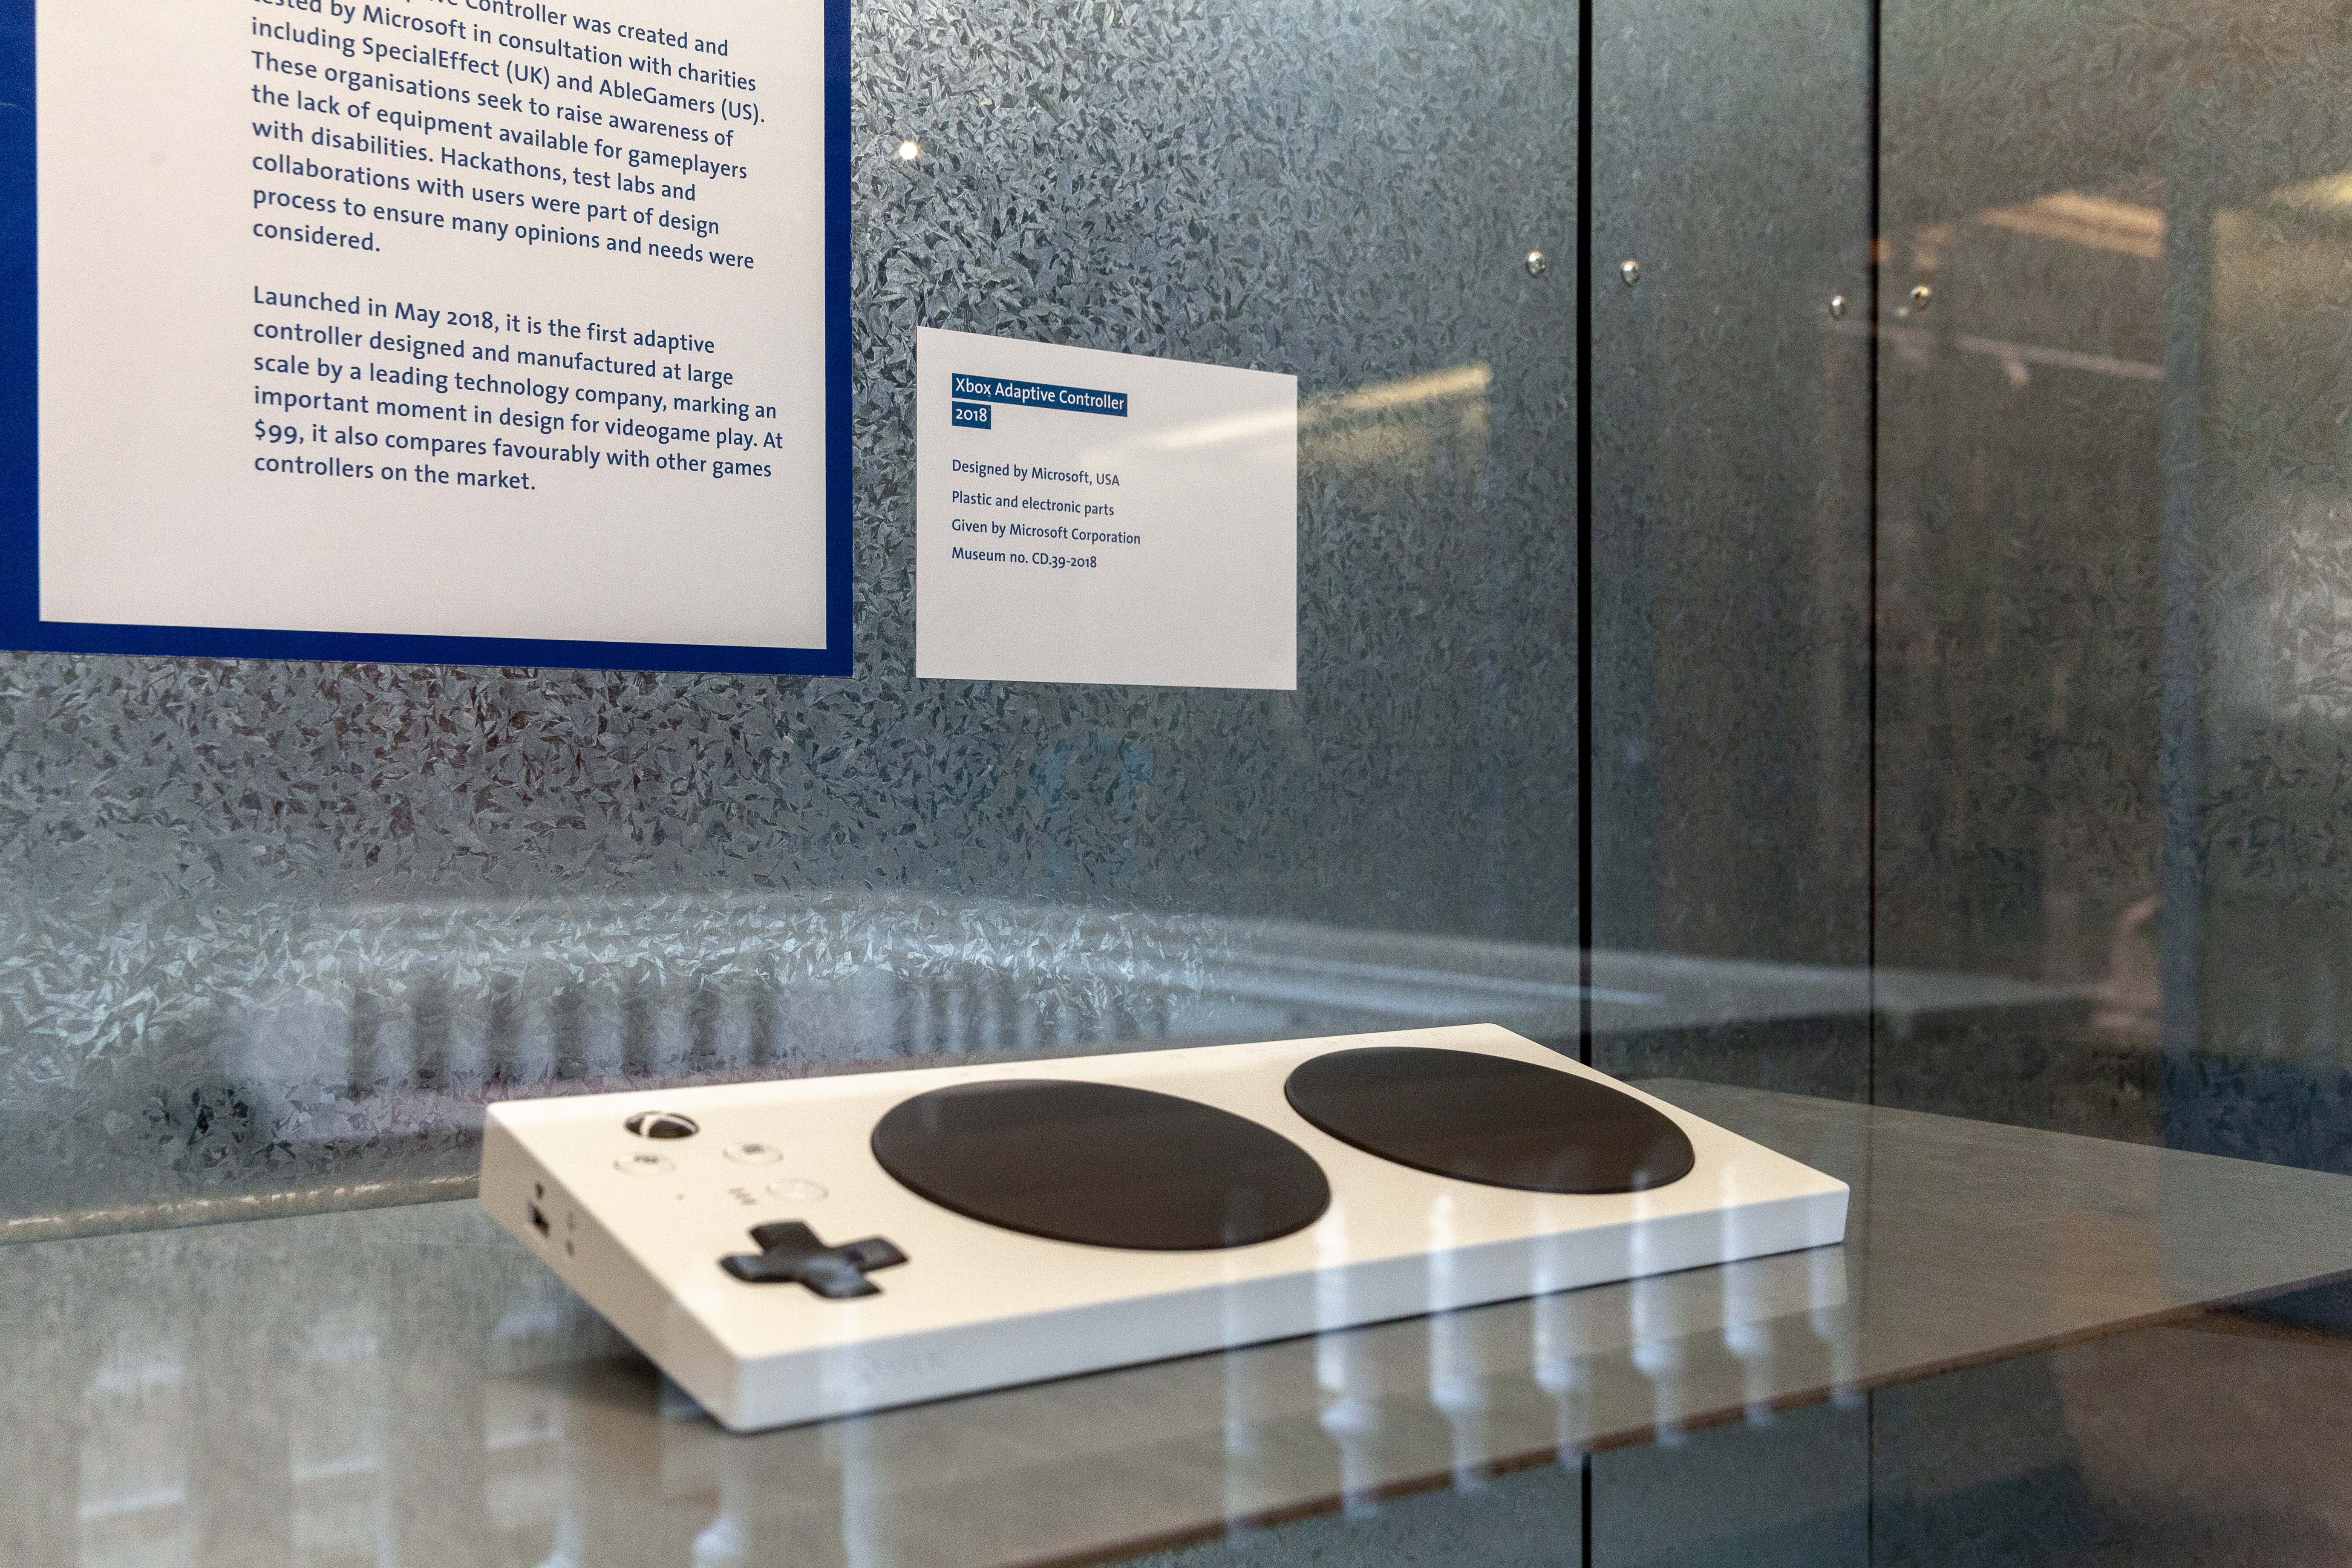 The Xbox Adaptive Controller on display at the V&A